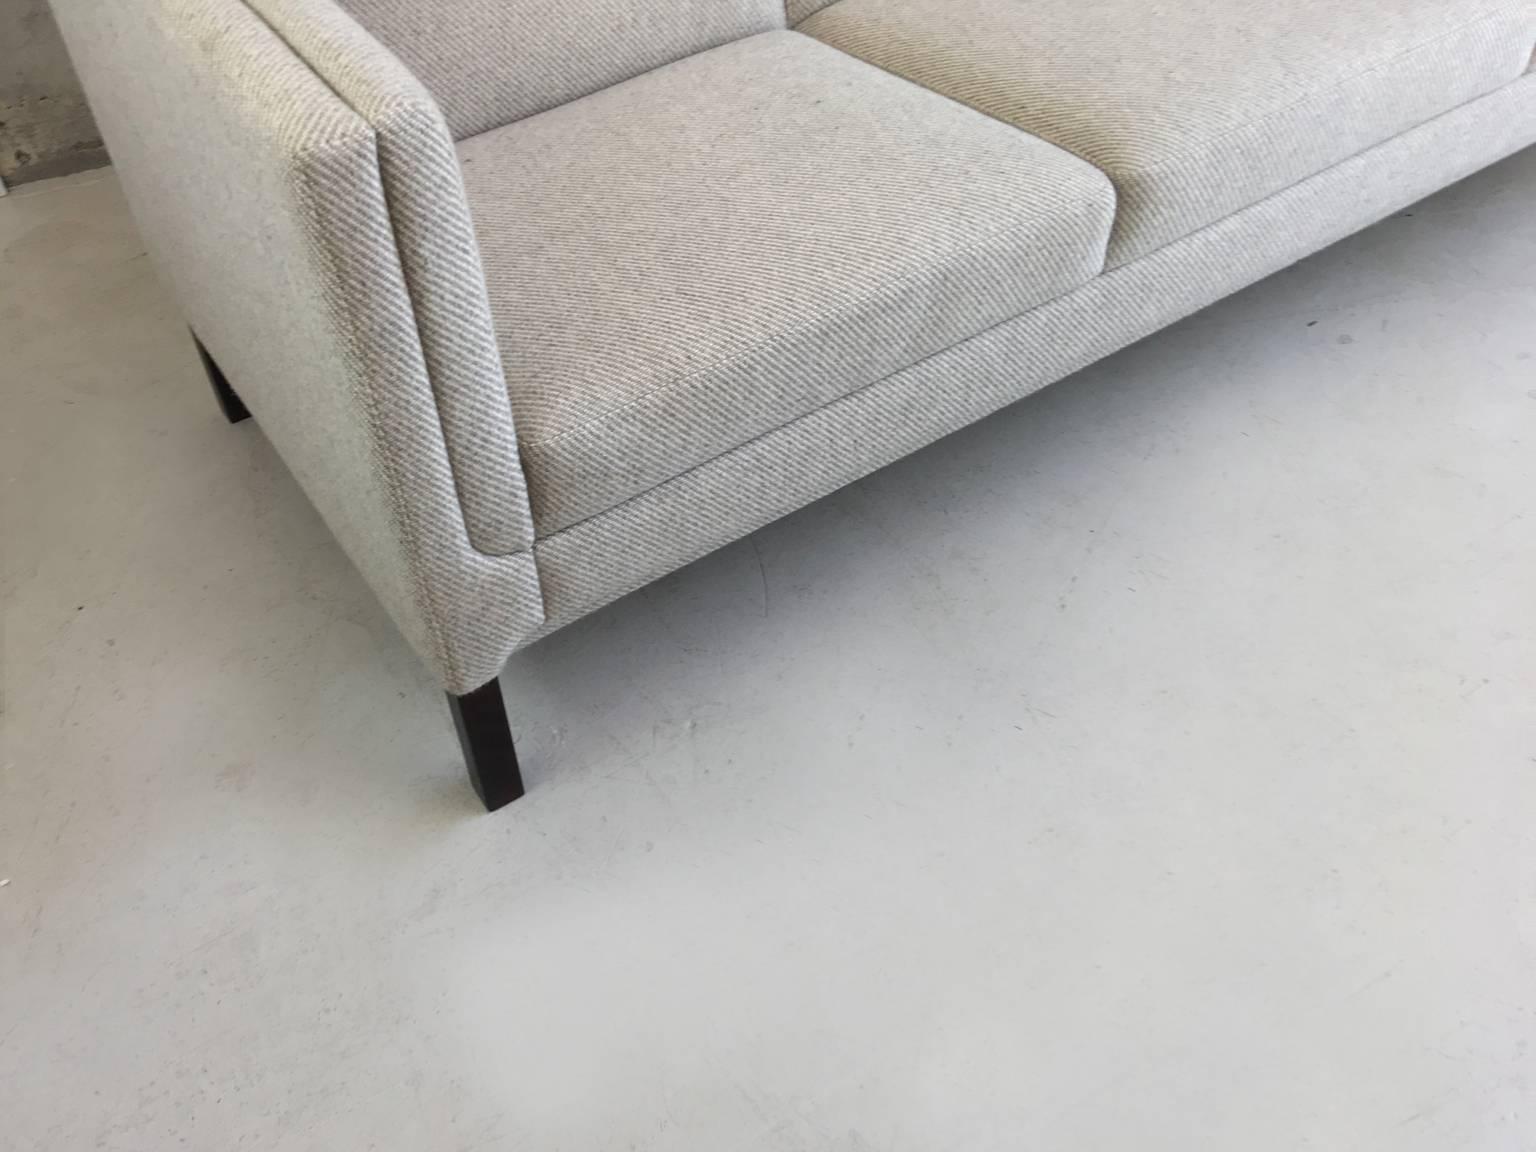 A minimal clean lined Danish three-seat sofa in incredible condition. The original fabric is light grey wool with a subtle herring bone pattern. It has double cushioned straight sides. The cushions are very firm. Extremely comfortable.
  